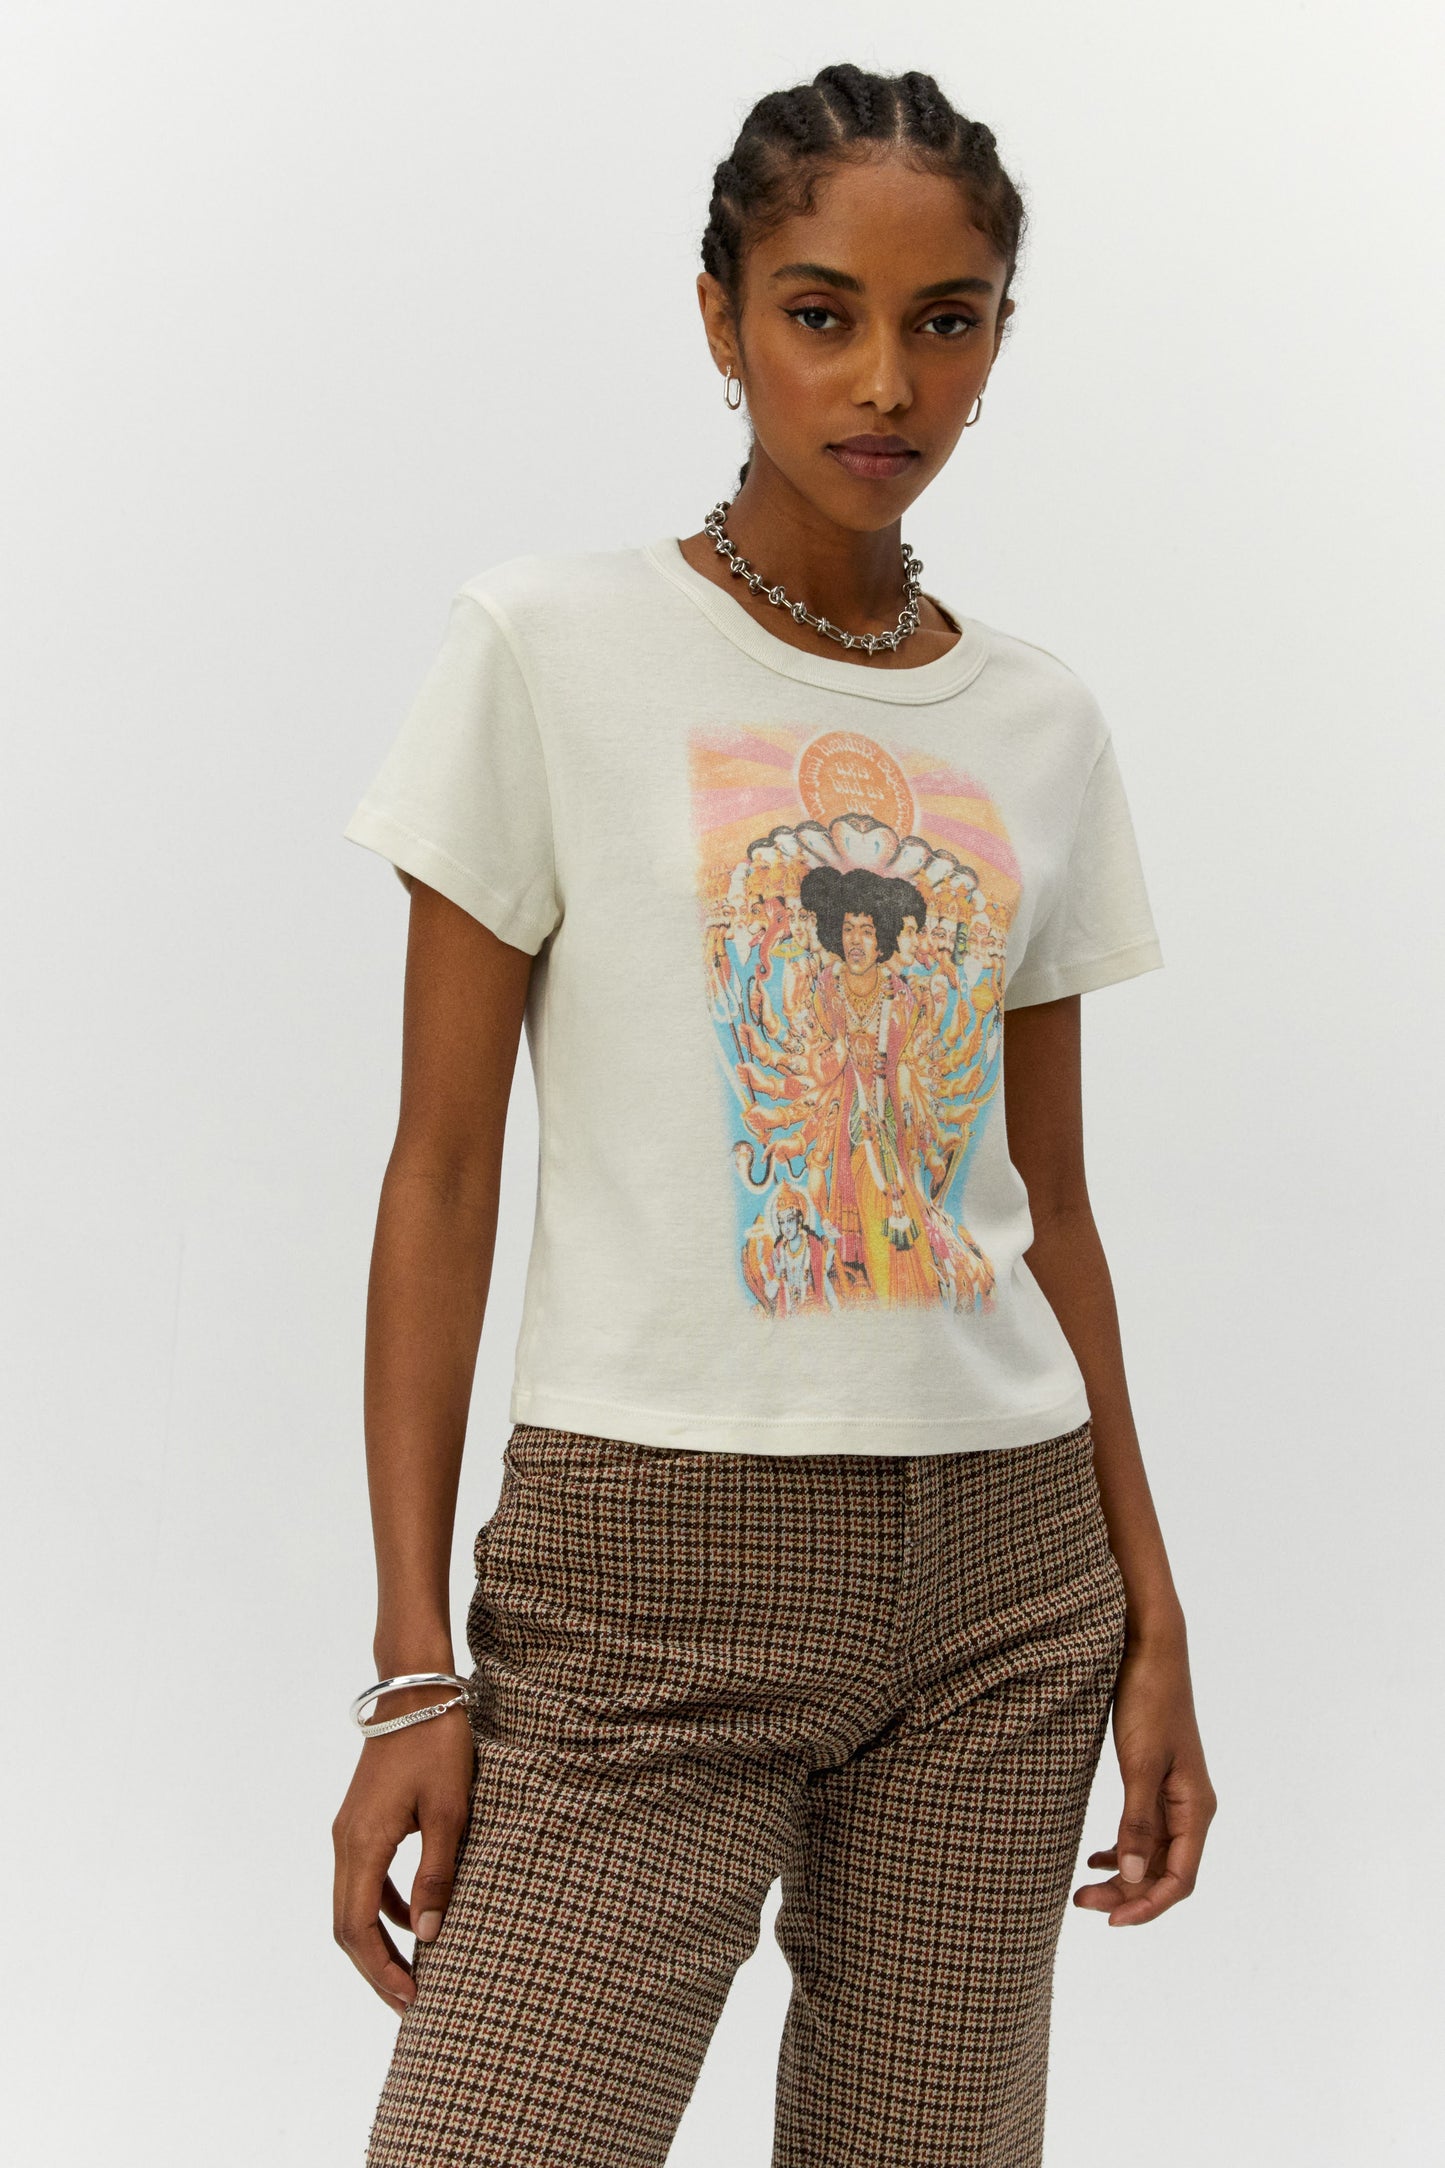 Dark braided-haired model featuring a white shrunken tee designed with a distressed rendition of the album cover’s original artwork